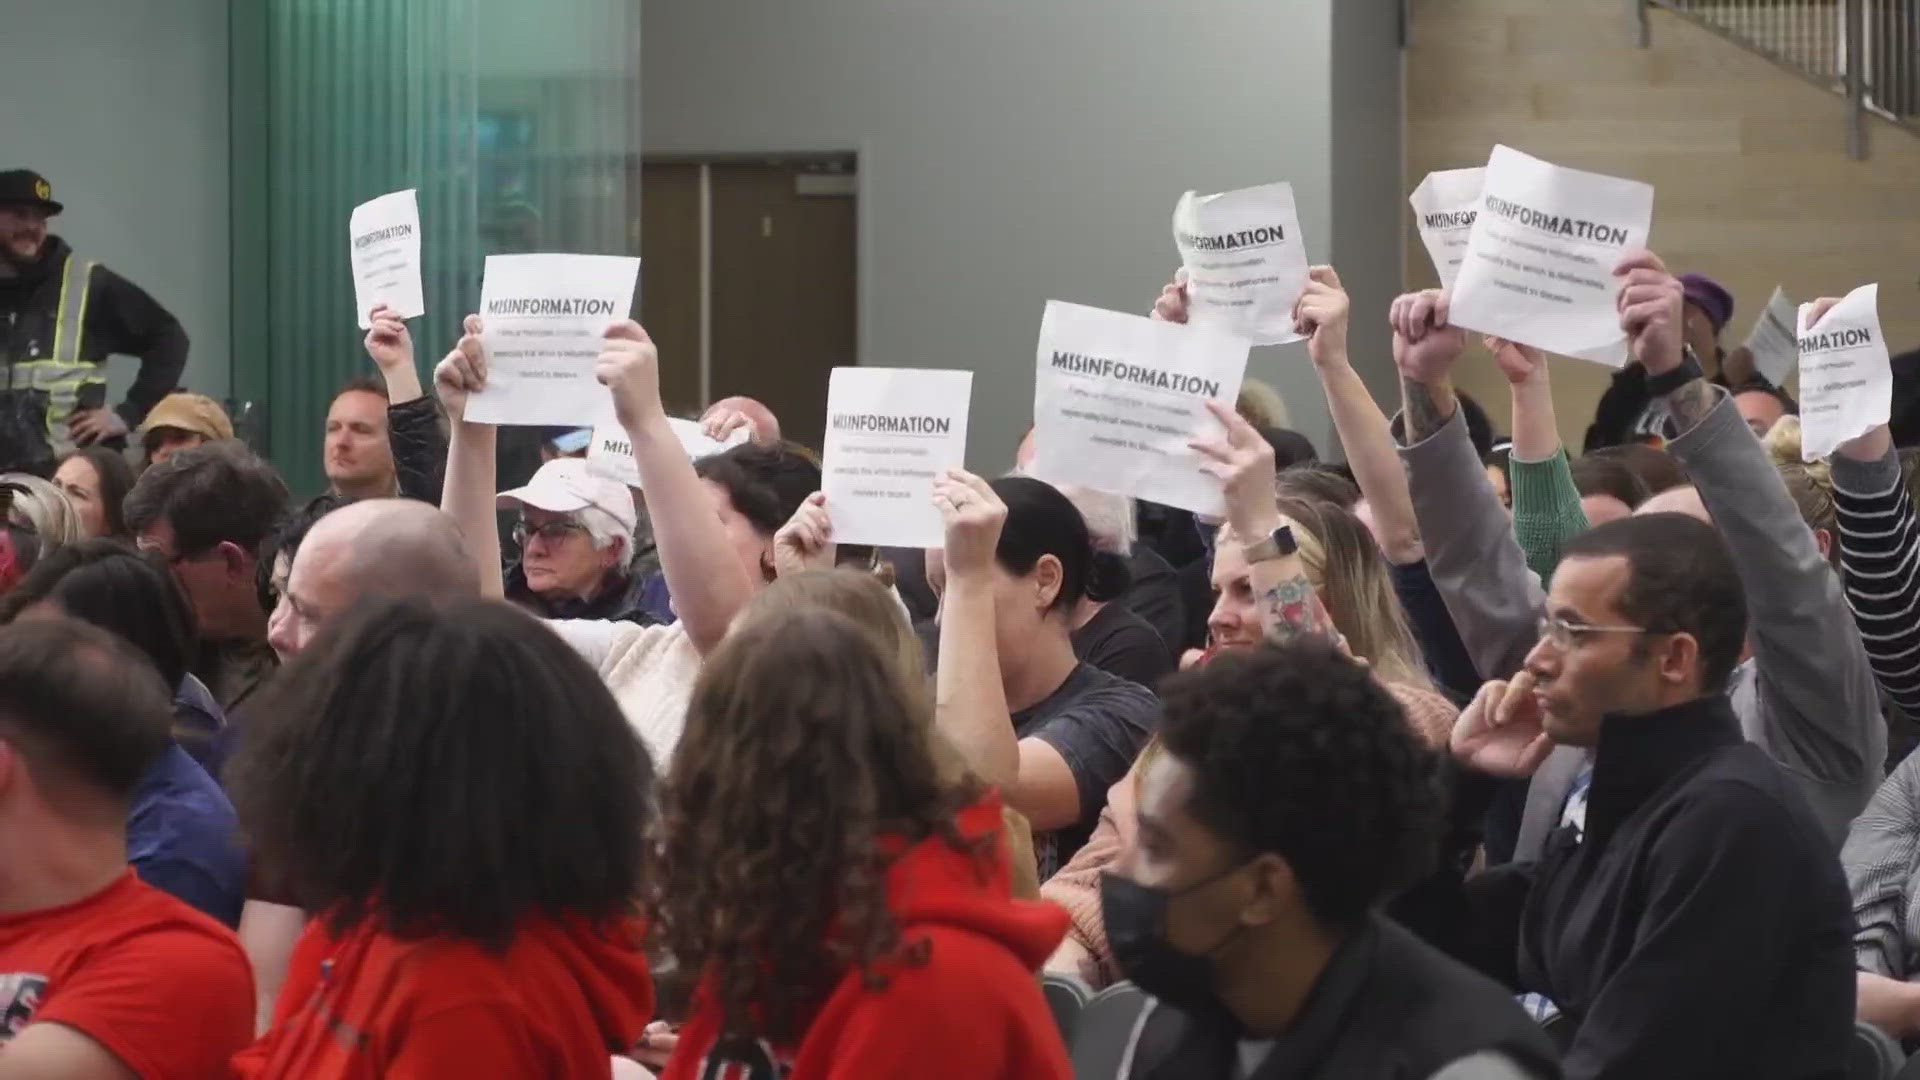 A Roseville Joint Union High School District Board meeting came to an abrupt end as tempers flared following the release of a Project Veritas video.